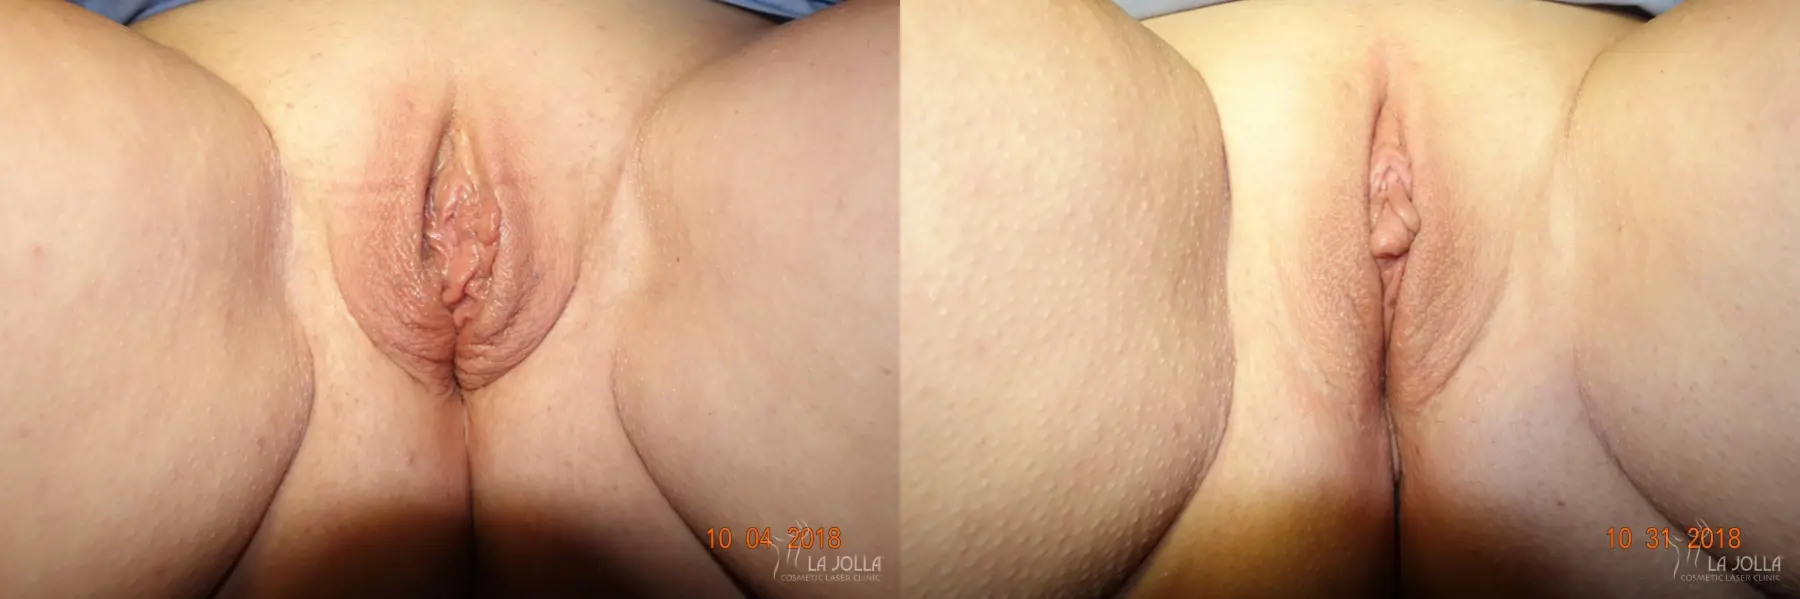 ThermiVa®: Patient 1 - Before and After  